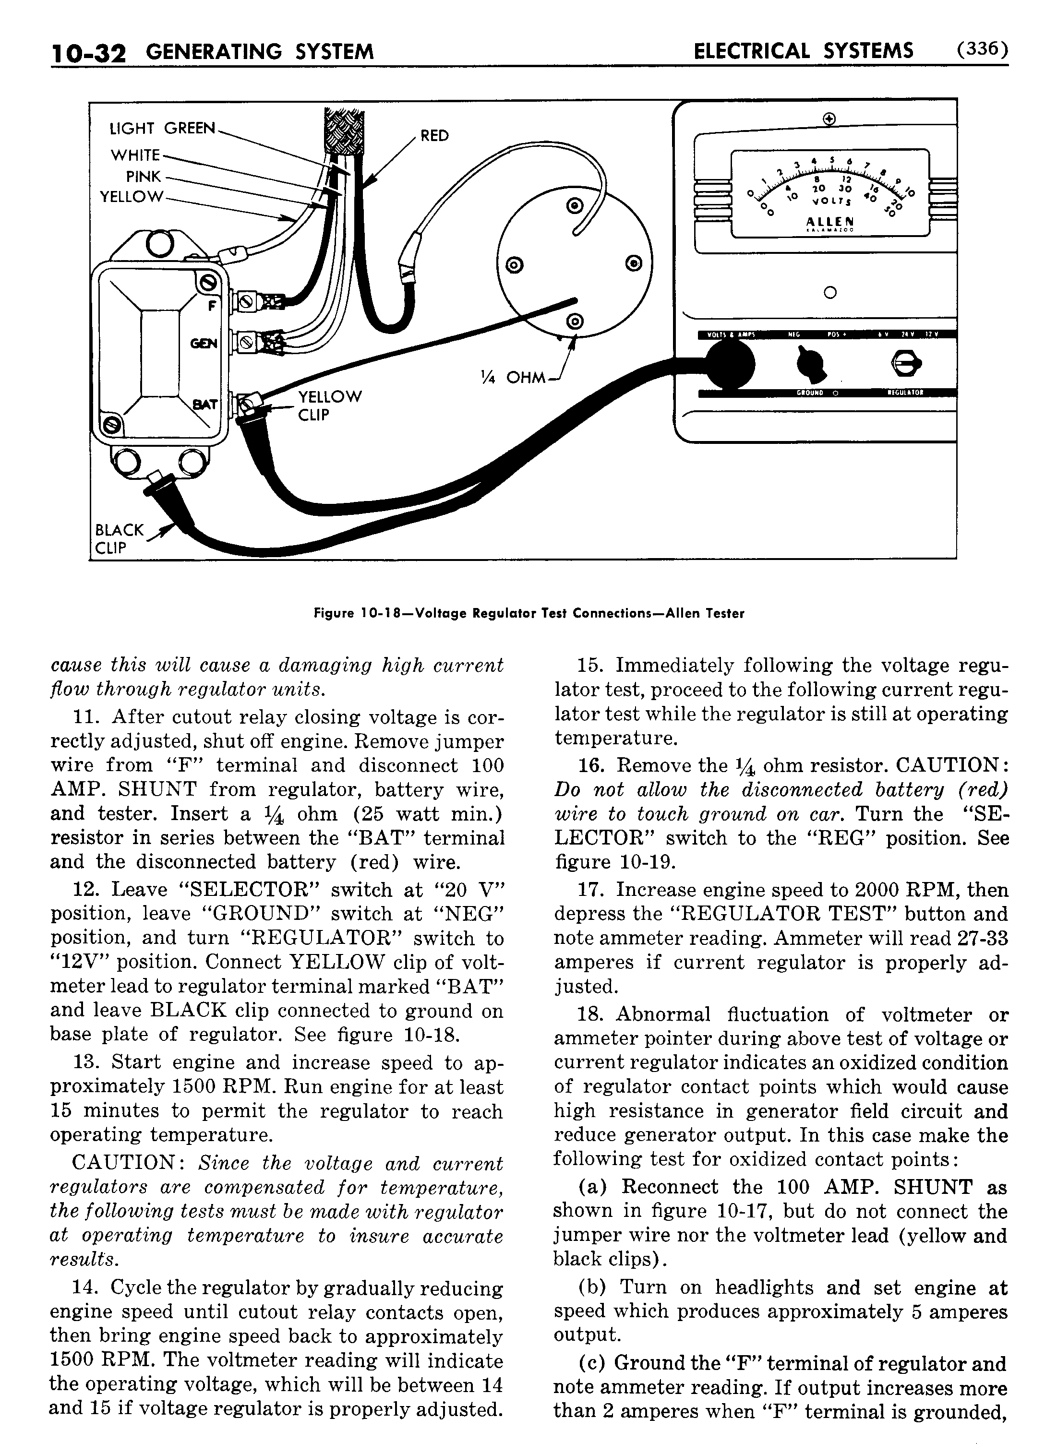 n_11 1955 Buick Shop Manual - Electrical Systems-032-032.jpg